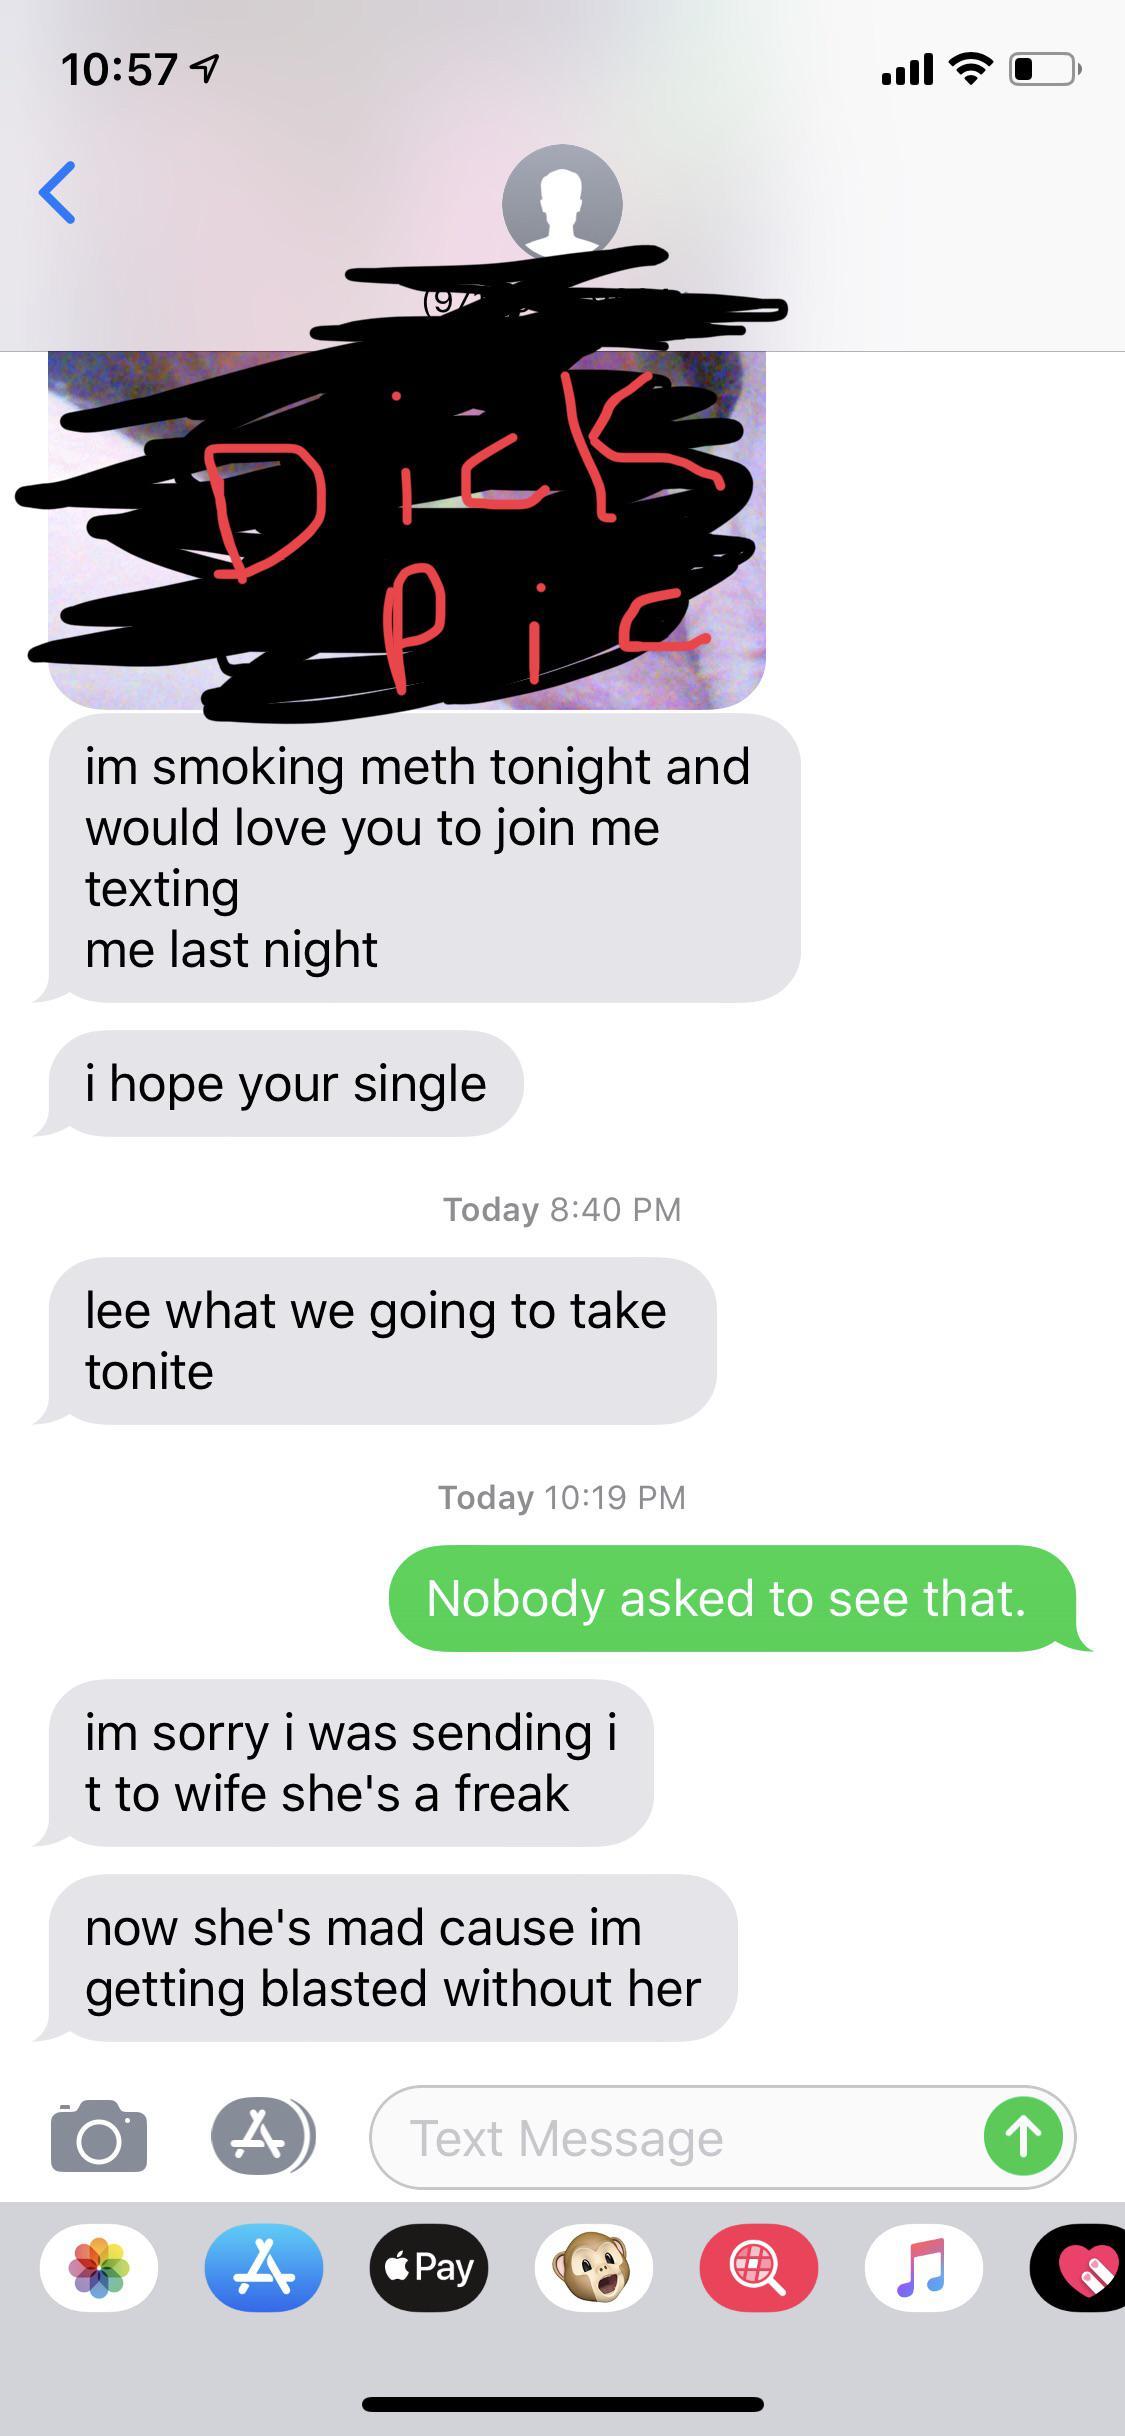 colorado school shooting text - 7 9 im smoking meth tonight and would love you to join me texting me last night i hope your single Today lee what we going to take tonite Today Nobody asked to see that. im sorry i was sending i t to wife she's a freak now 